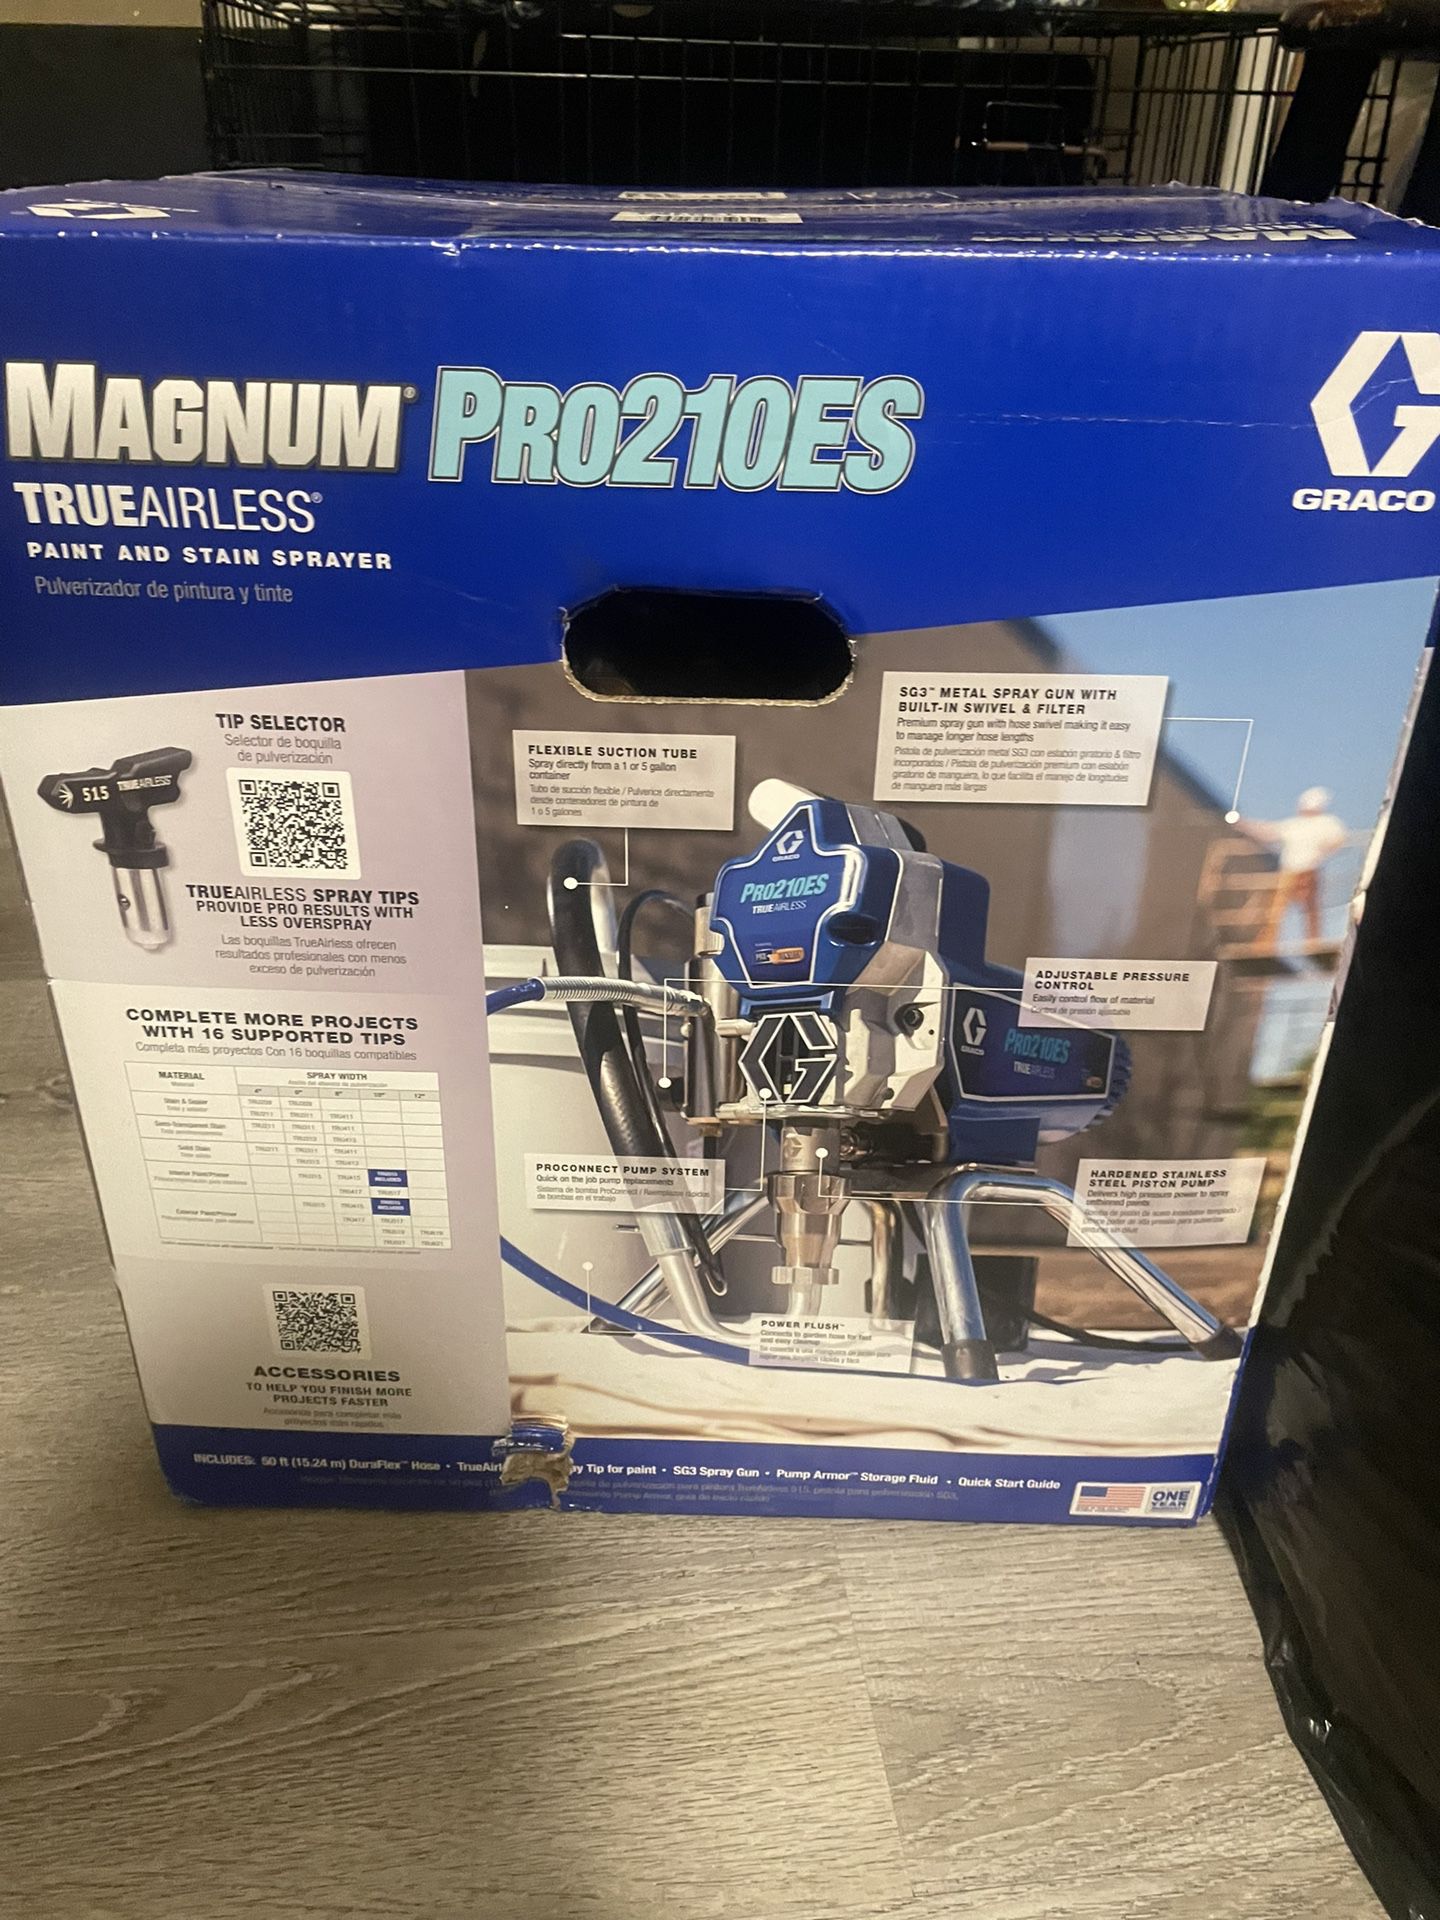 Brand New In Box Garco Magnum Pro210es Paint And Stain Sprayer 